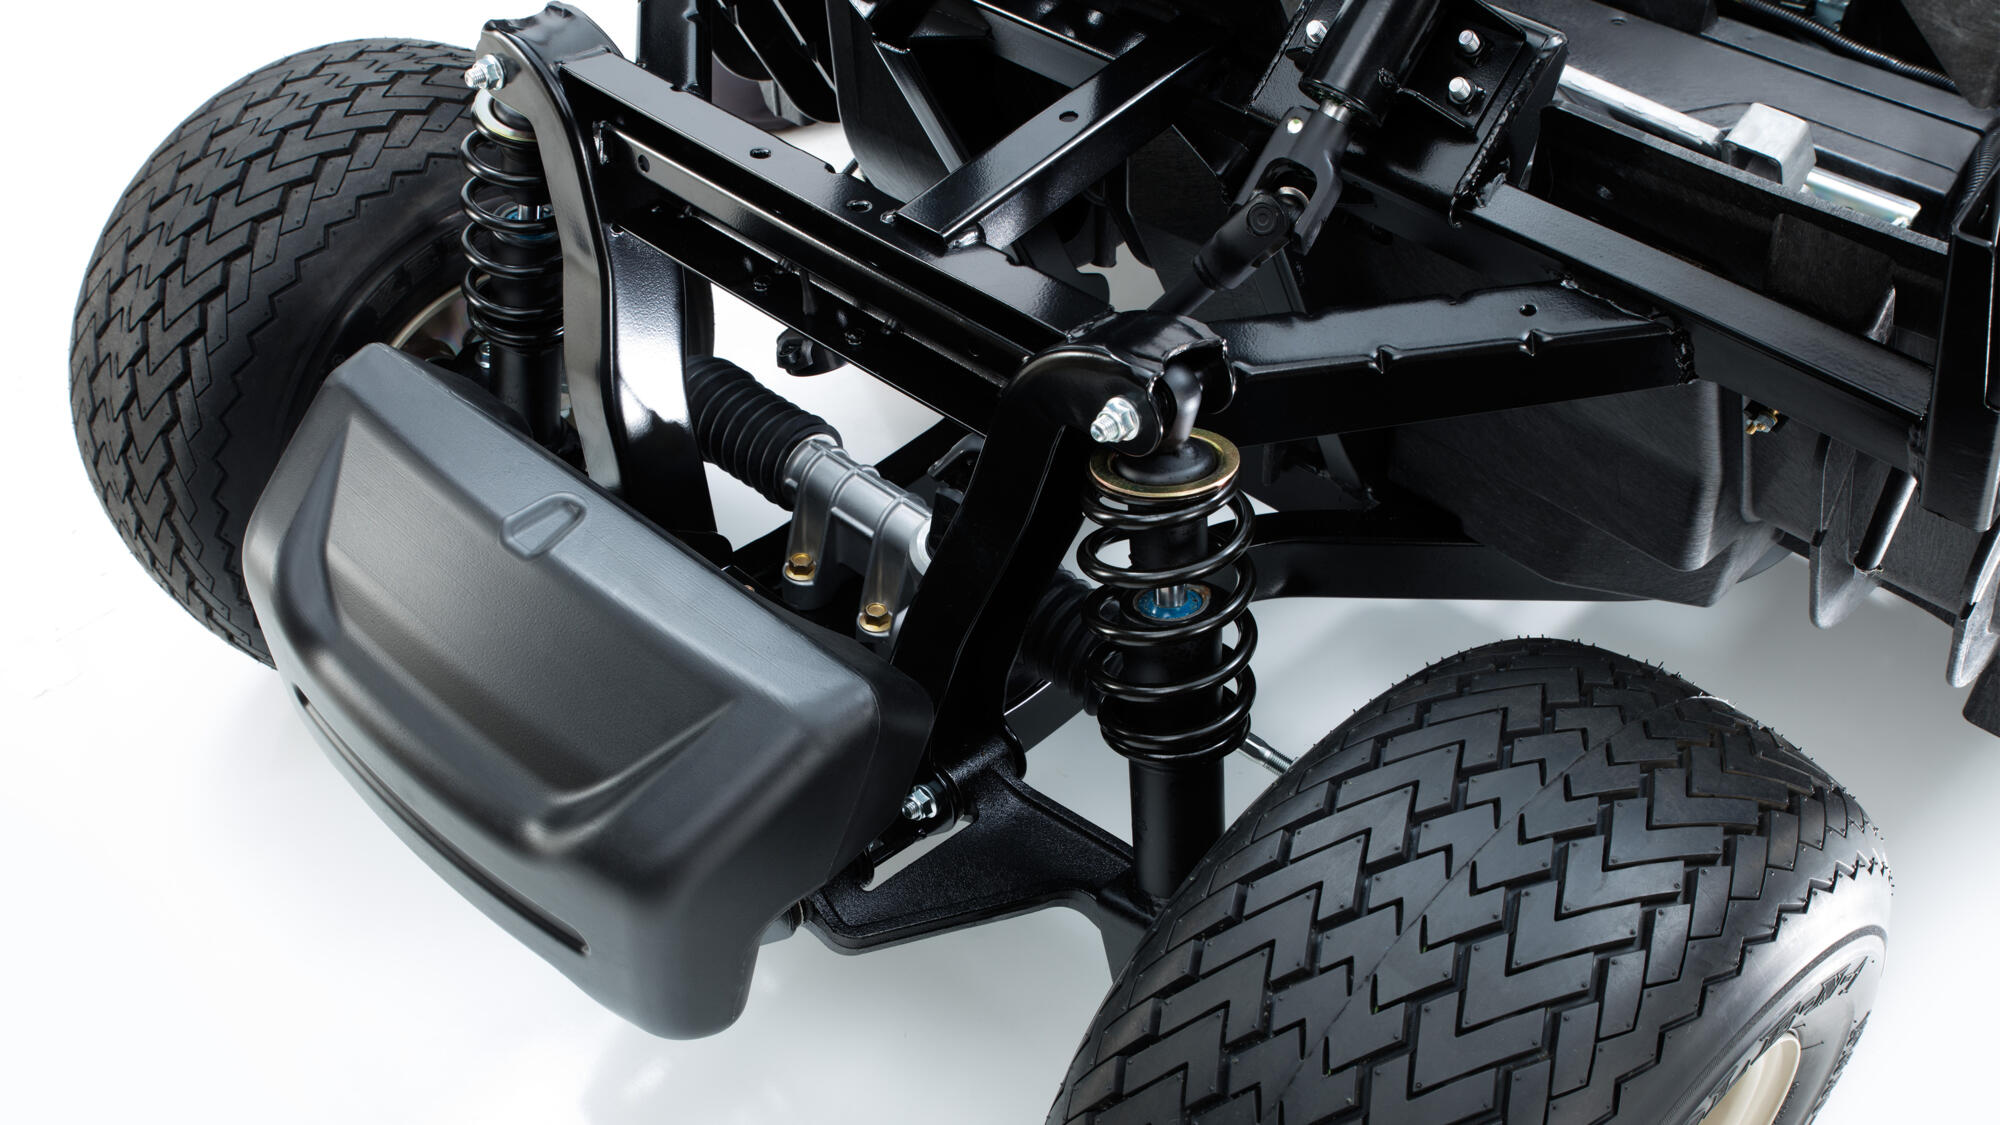 Independent front suspension